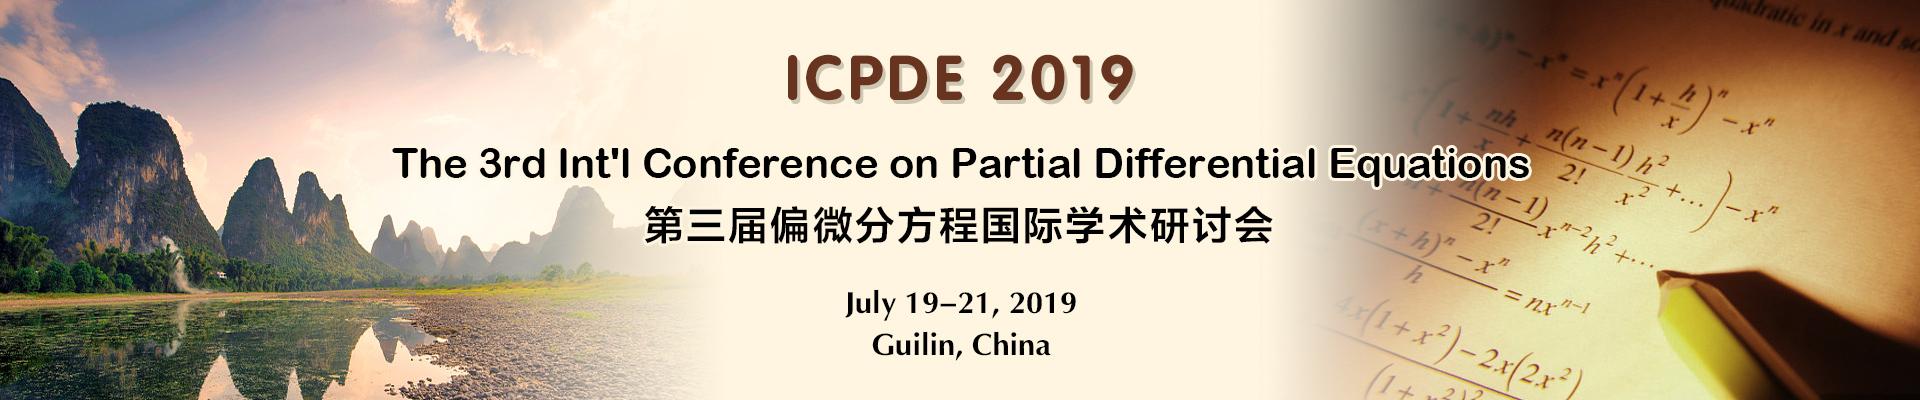 The 3rd Int'l Conference on Partial Differential Equations (ICPDE 2019), Guilin, Guangxi, China